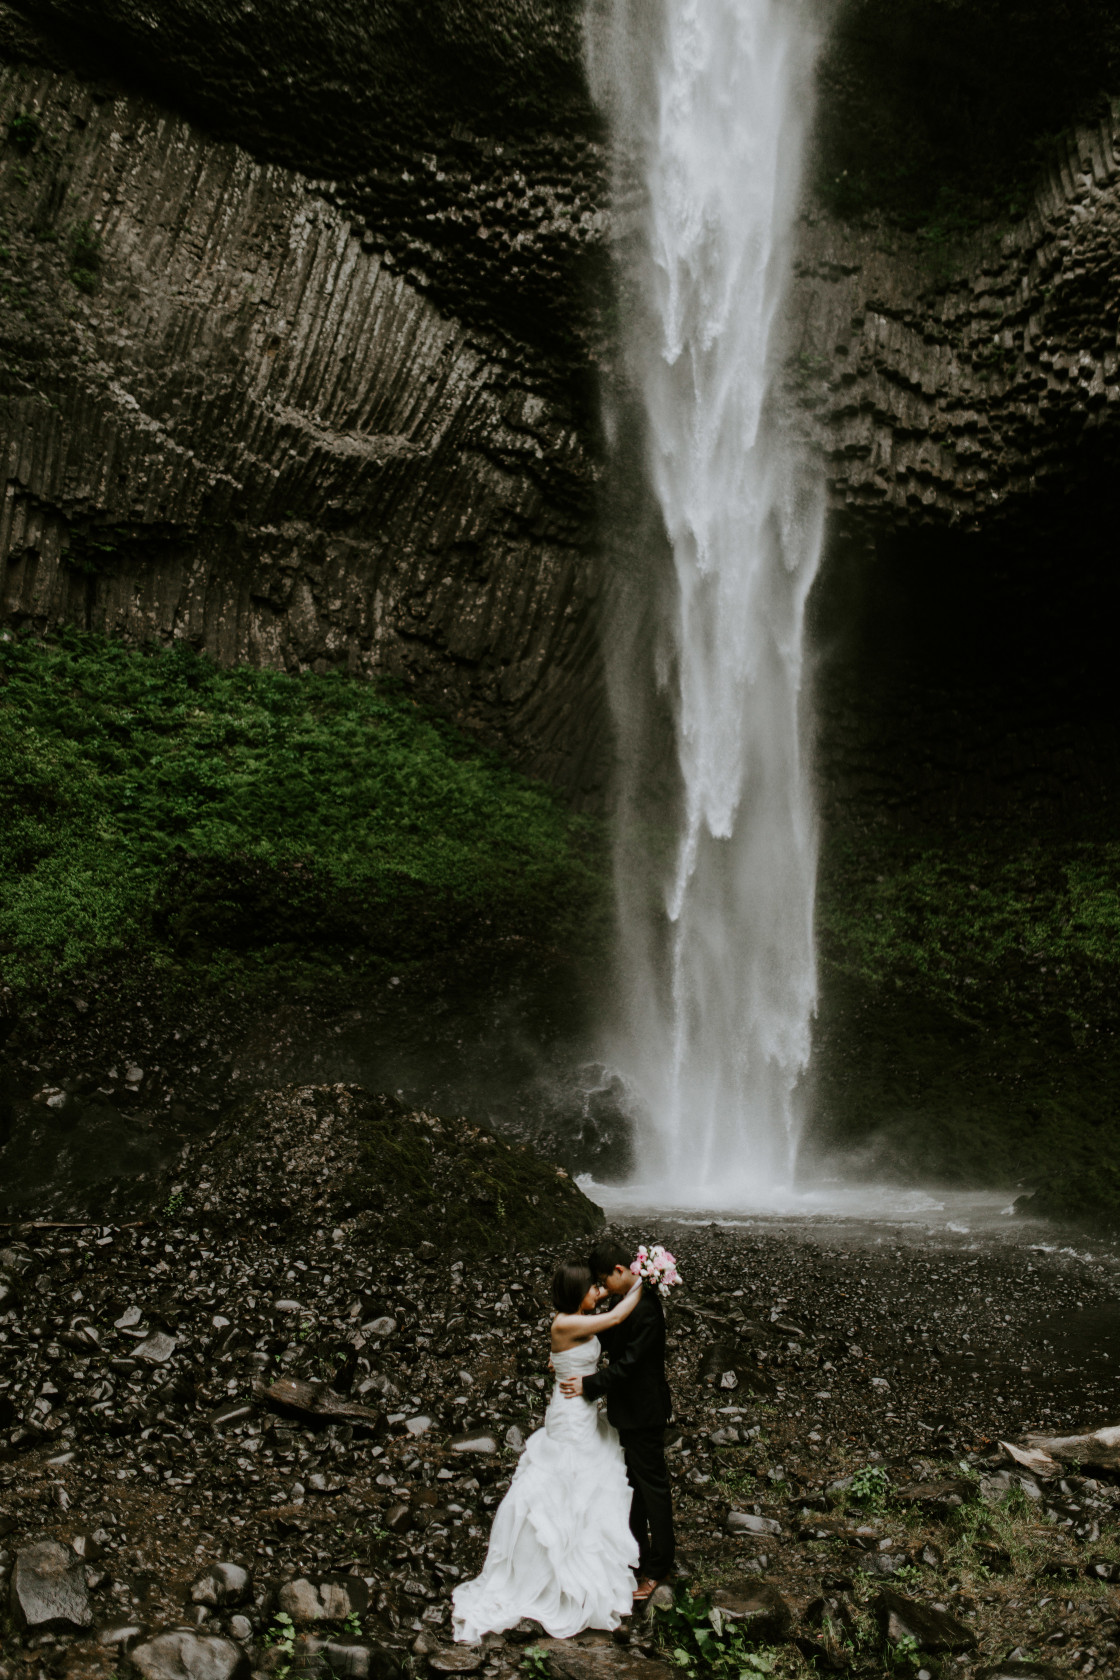 Alex and Valerie stand forehead to forehead at a waterfall. Elopement wedding photography at Mount Hood by Sienna Plus Josh.